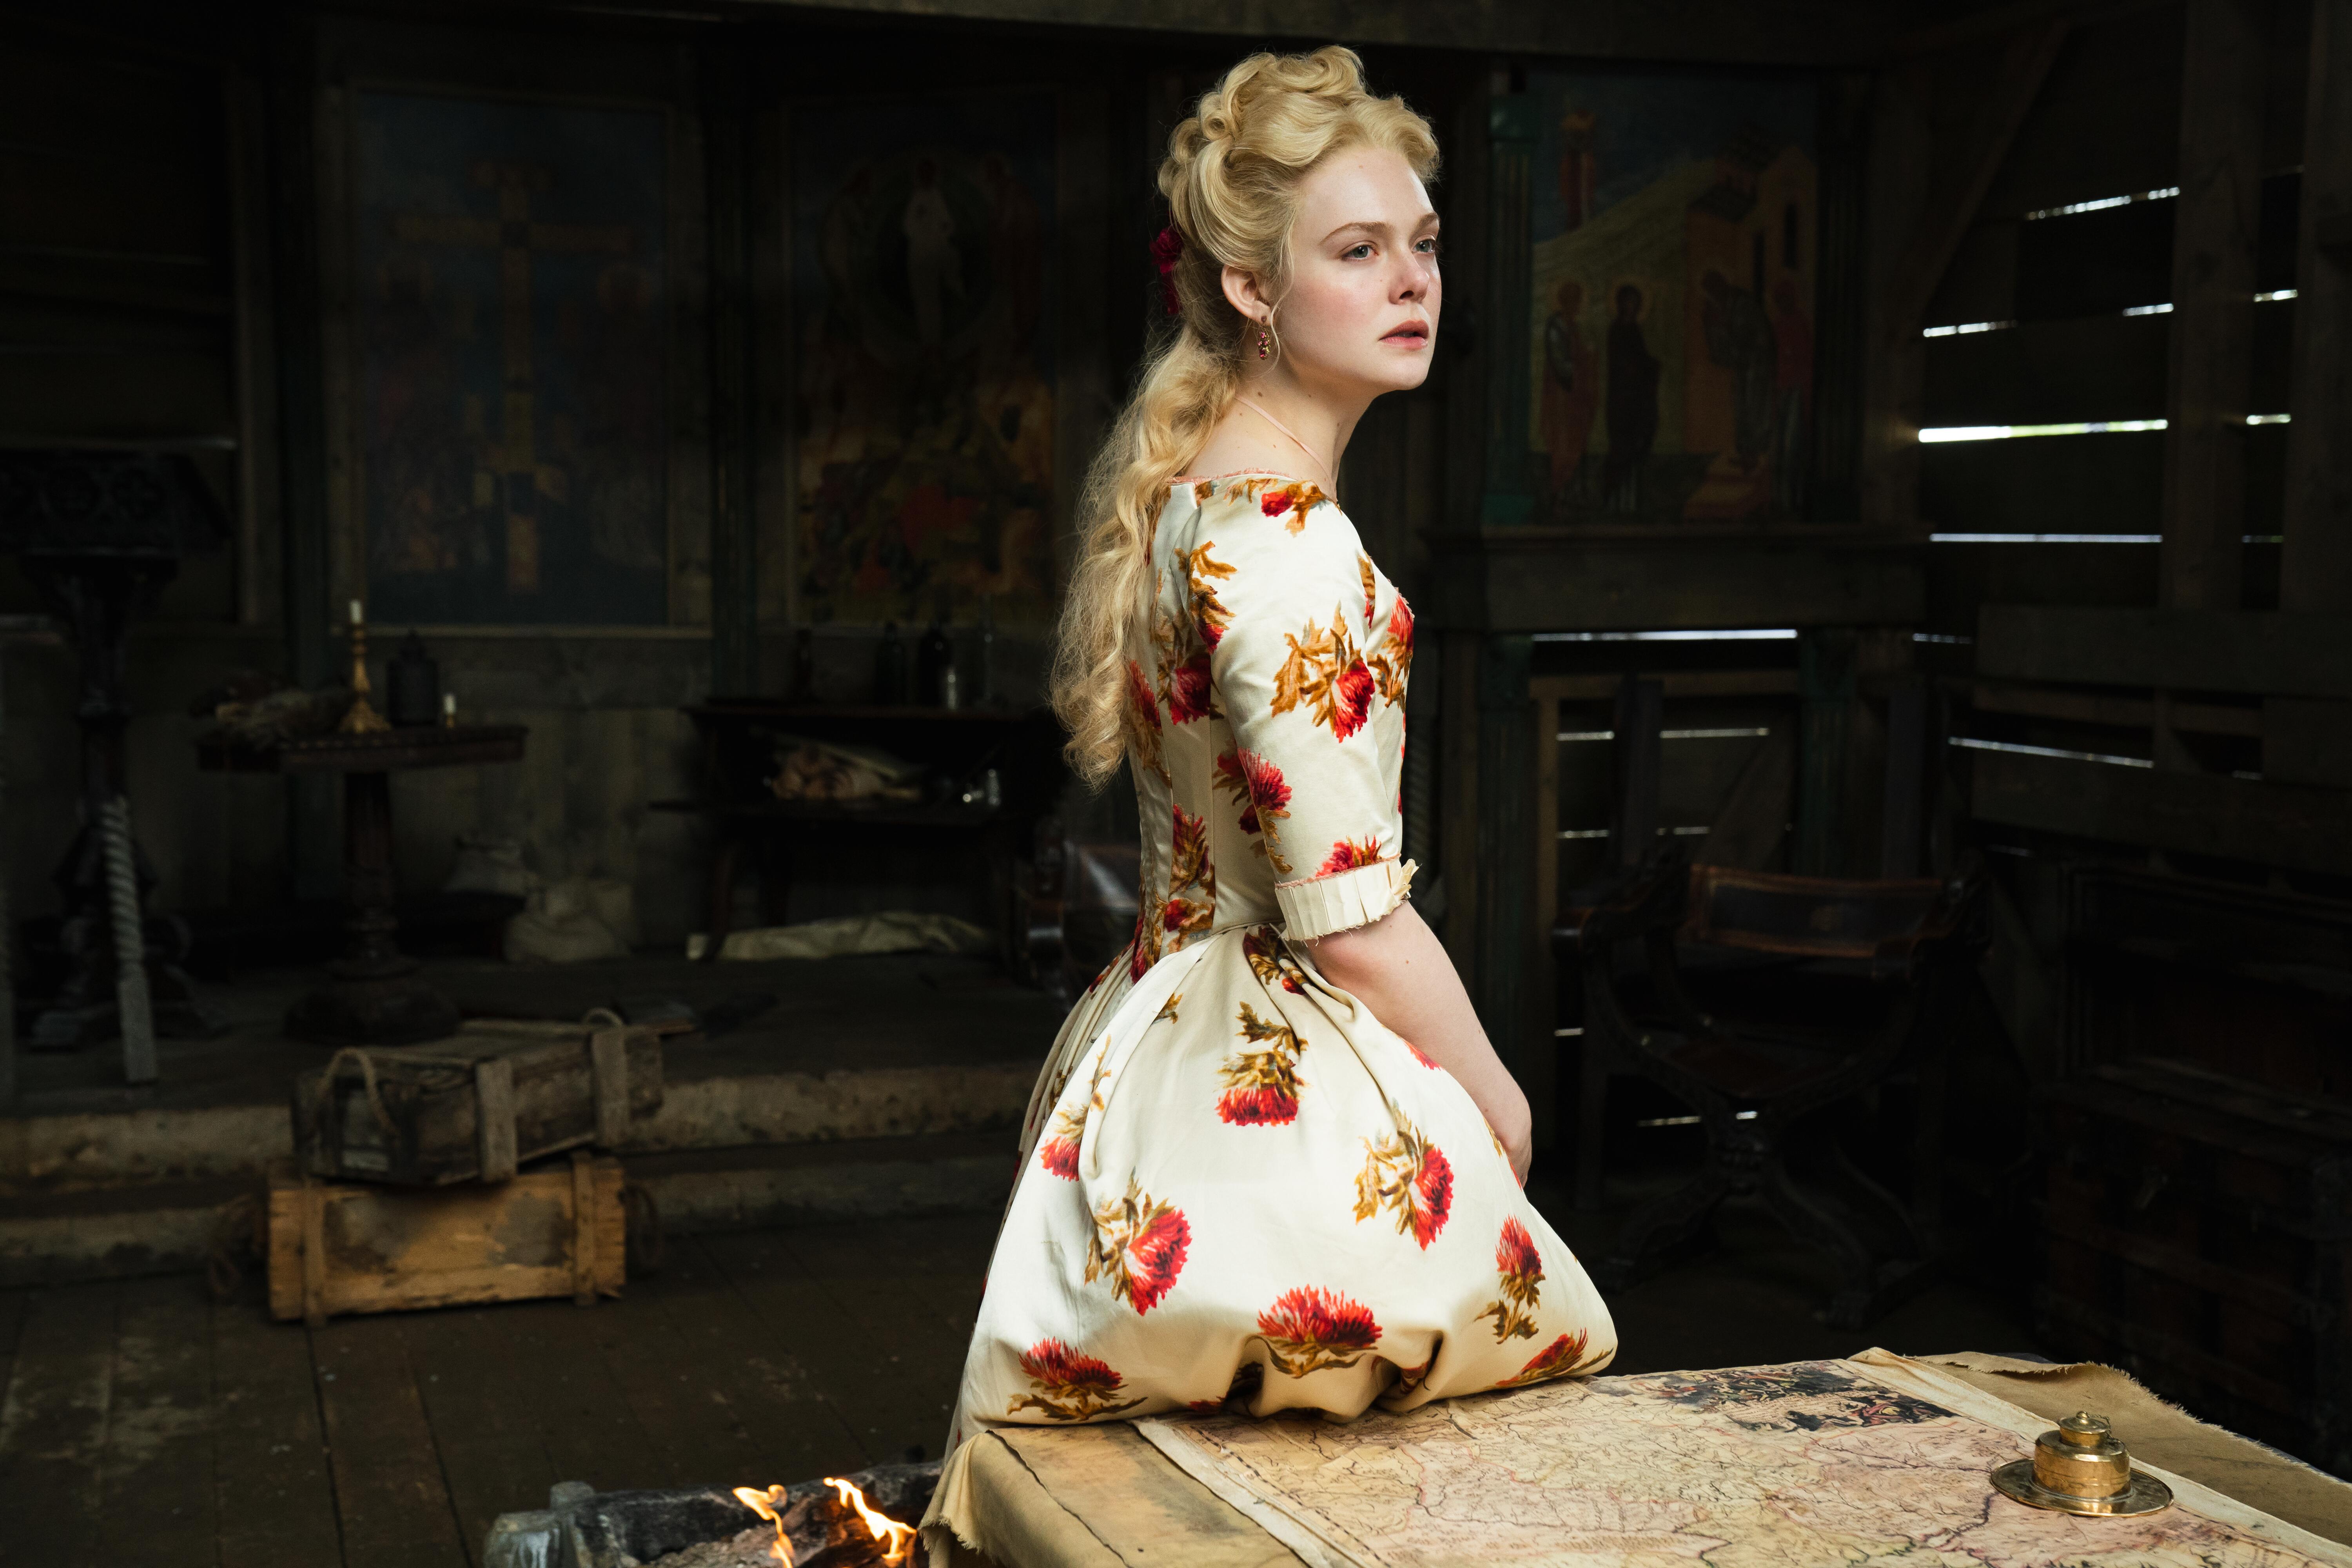 Elle Fanning as Catherine, wearing a floral-patterned dress in the Hulu series 'The Great'